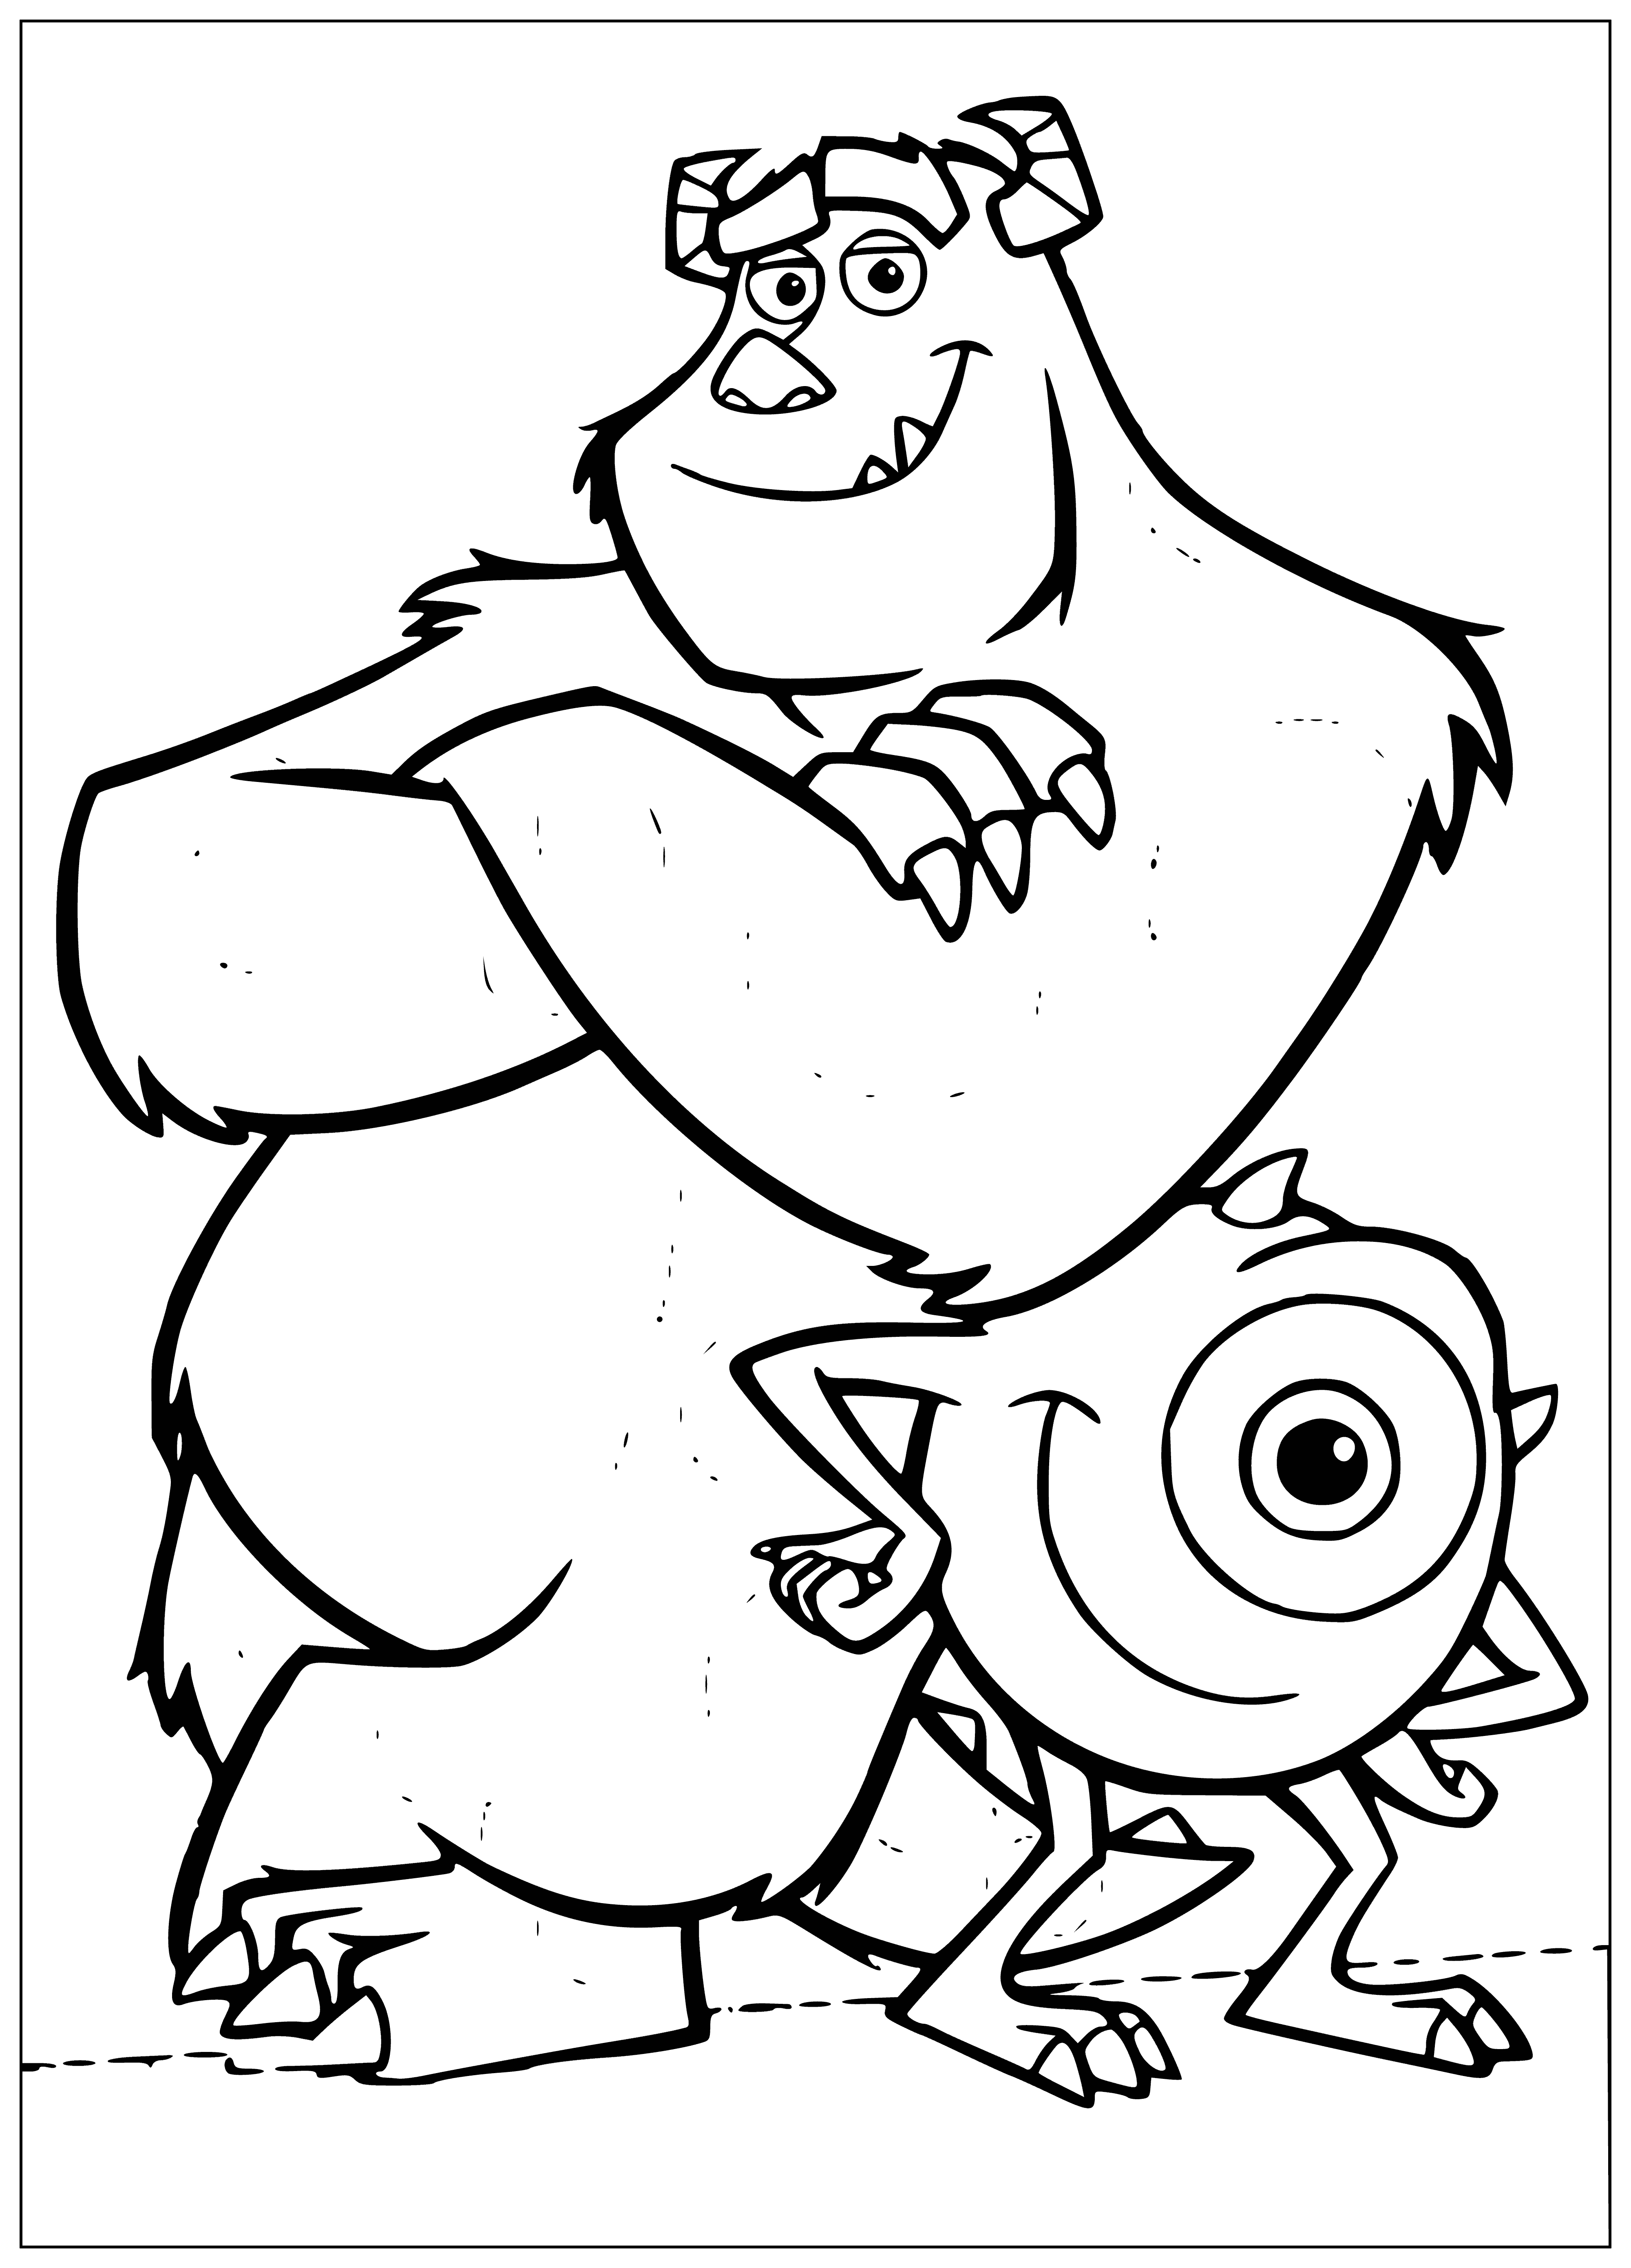 Sally and Mike coloring page